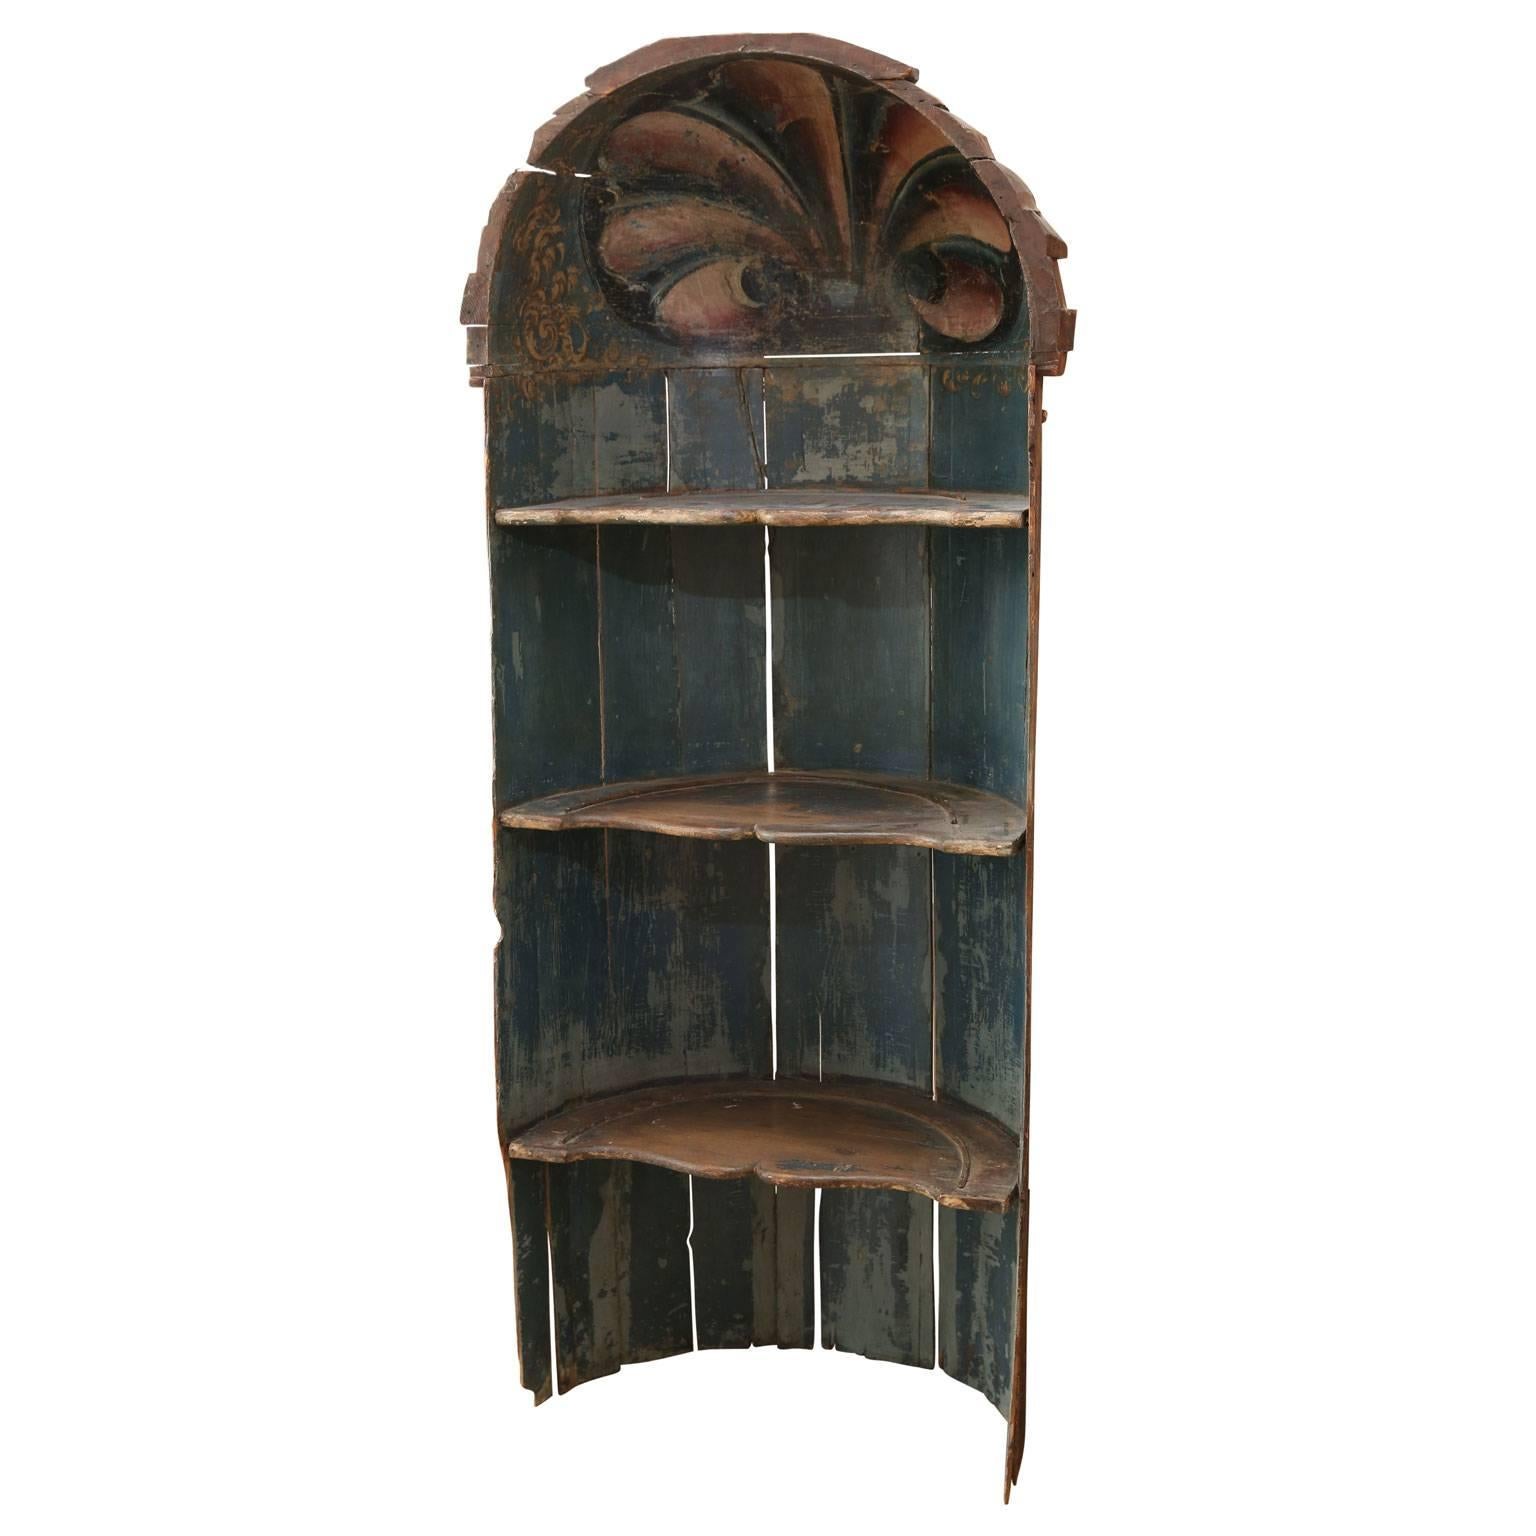 Baroque period niche (bowfat) painted in dark blue with secondary colors of gold, violet and pink. Dates early to mid-18th century and features built-in open cupboard (bowfat). Dutch or French in origin with a marvelous sculptural quality. Interior